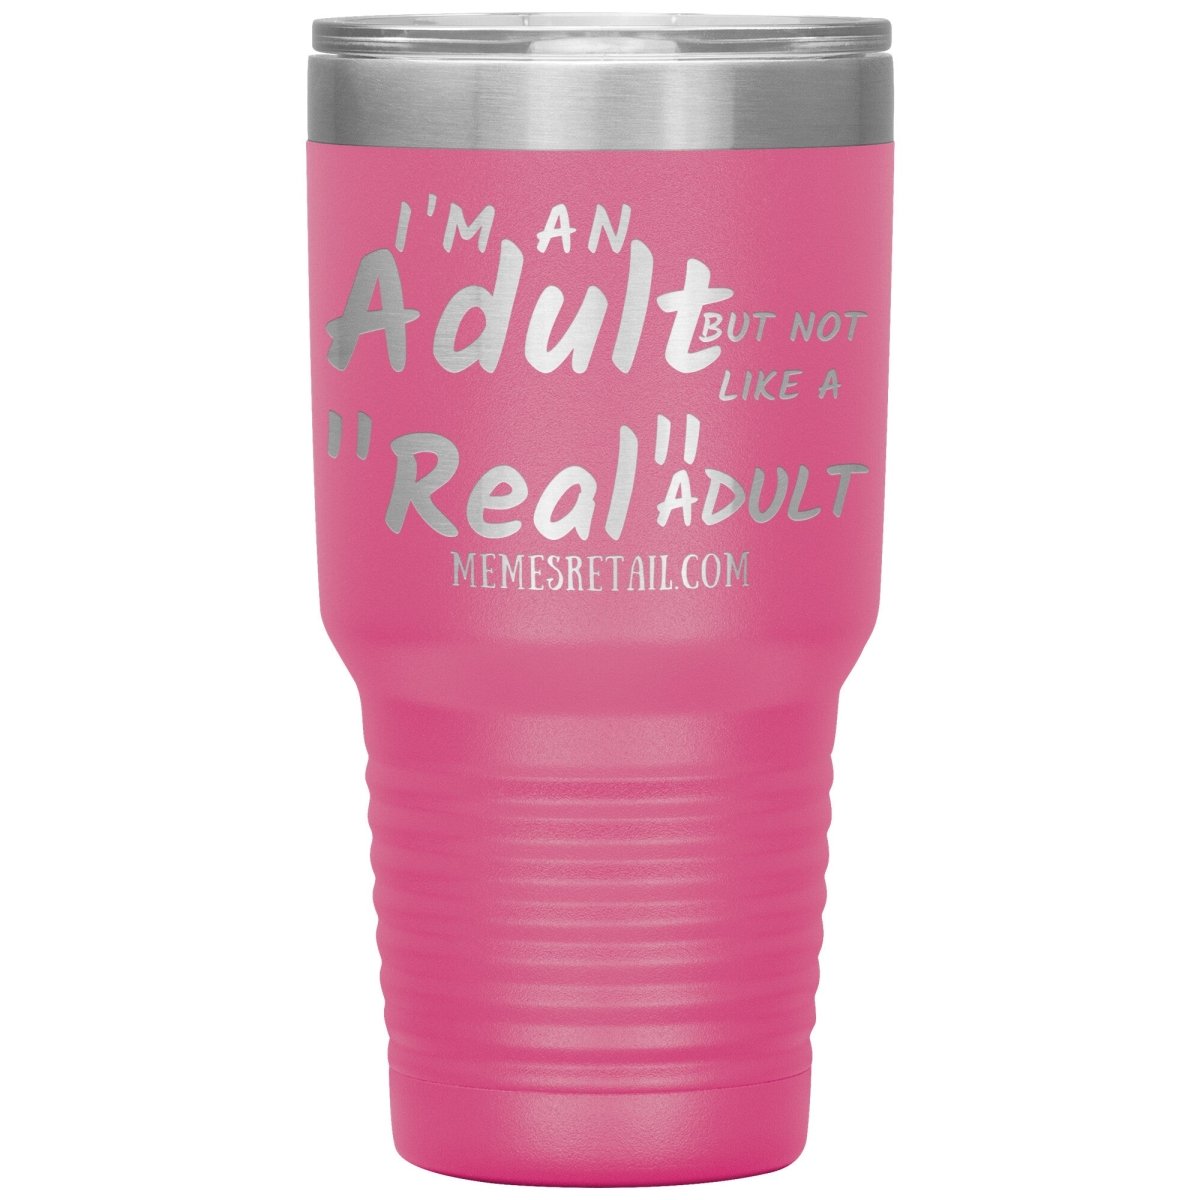 I'm an adult, but not like a "real" adult Tumblers, 30oz Insulated Tumbler / Pink - MemesRetail.com